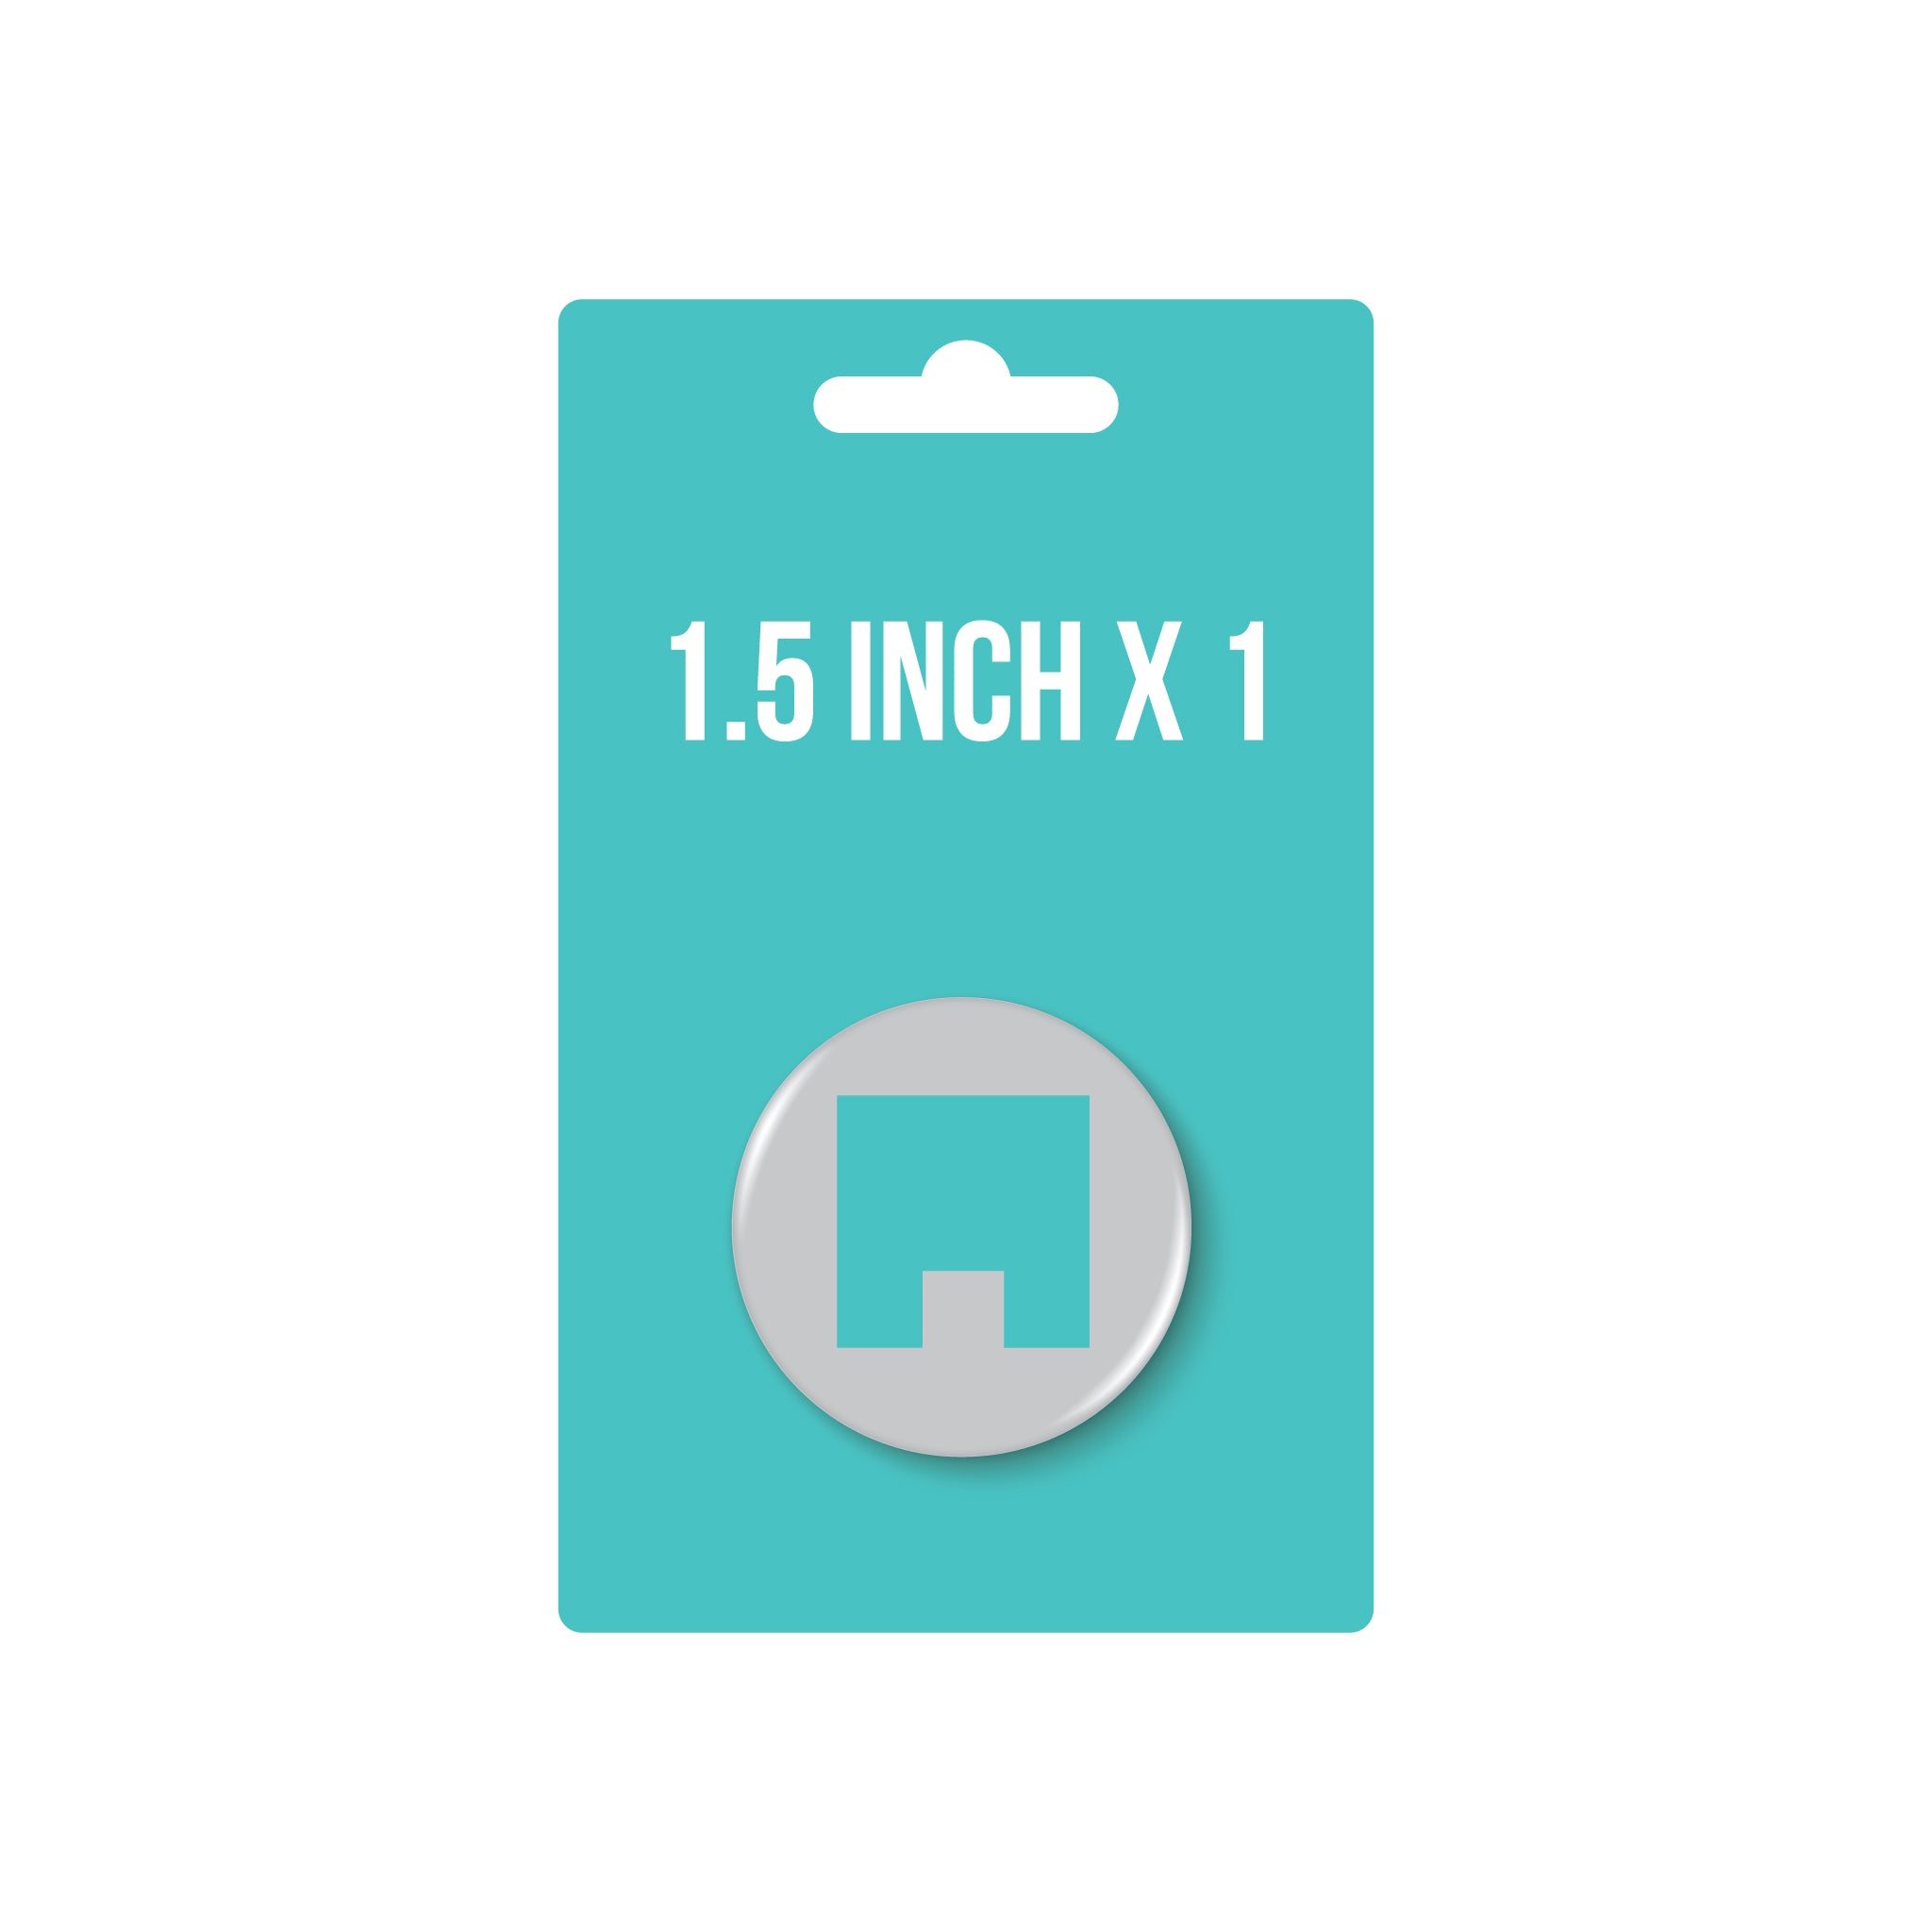 1.5" x 1 Button Pack